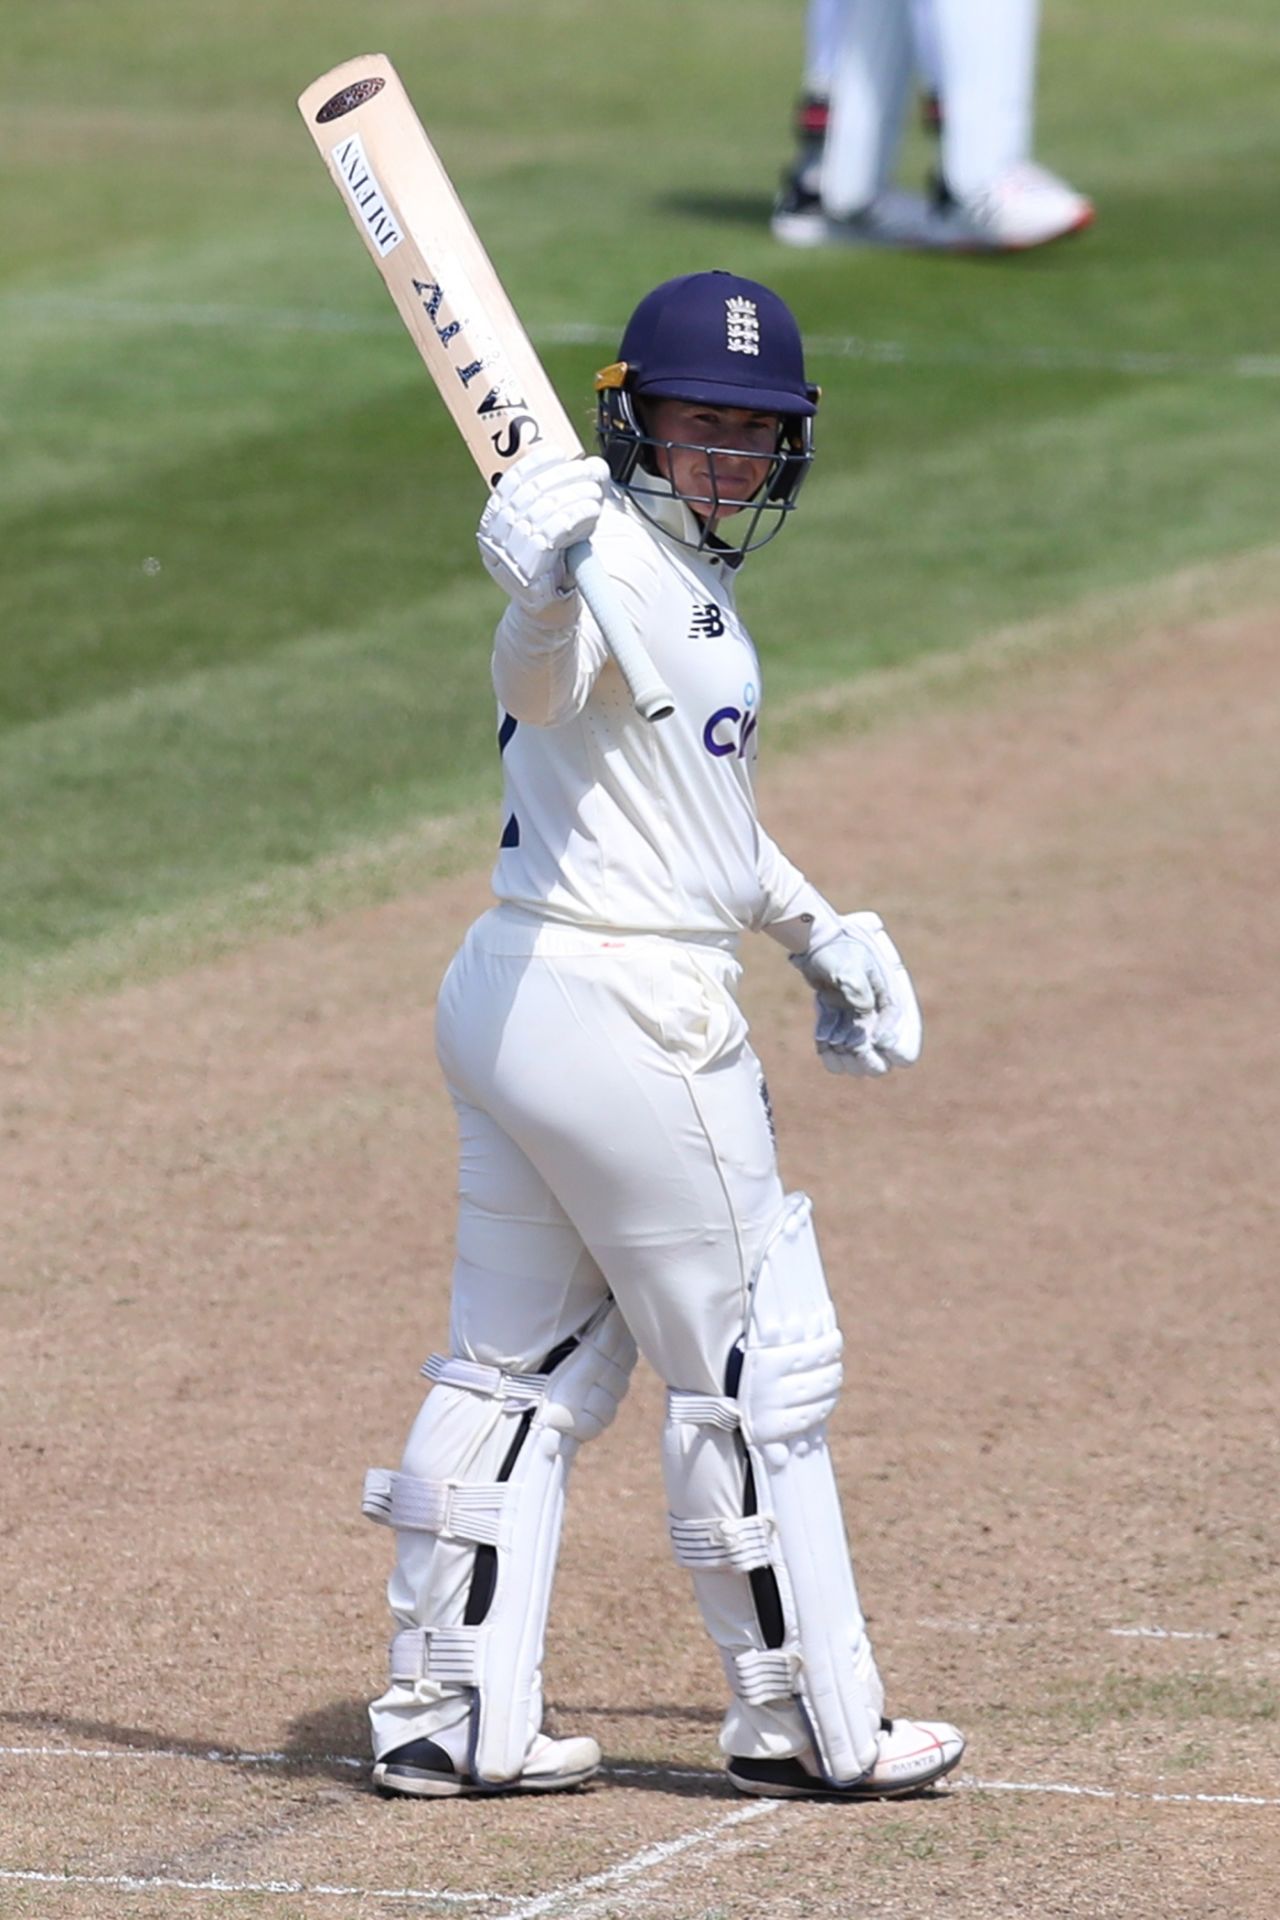 Tammy Beaumont got to her half-century after lunch, England Women vs India Women, Only Test, Bristol, 1st day, June 16, 2021